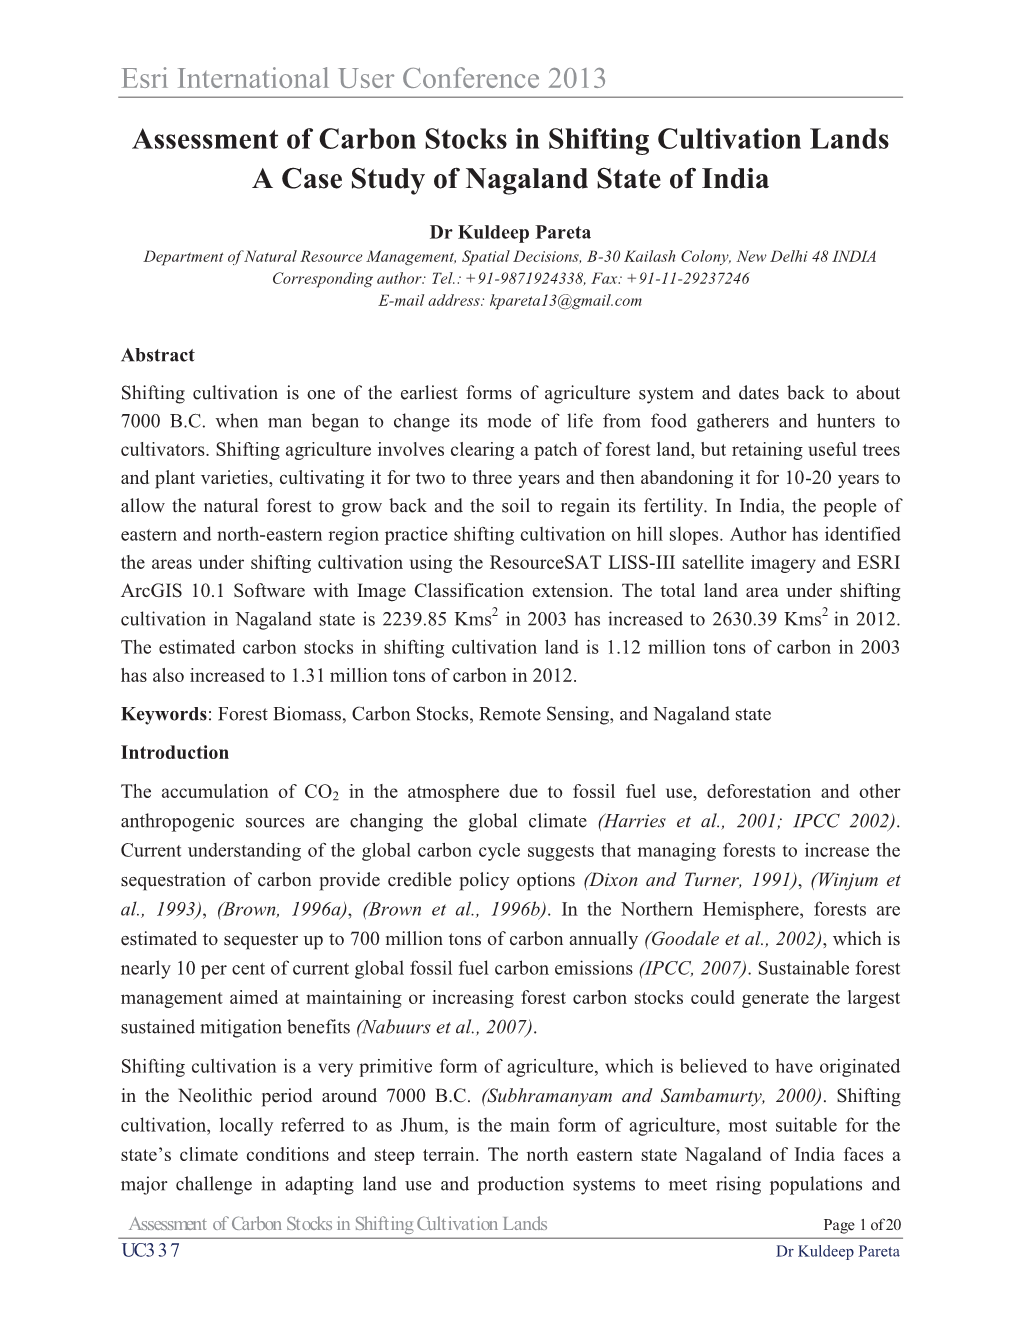 Assessment of Carbon Stocks in Shifting Cultivation Lands a Case Study of Nagaland State of India